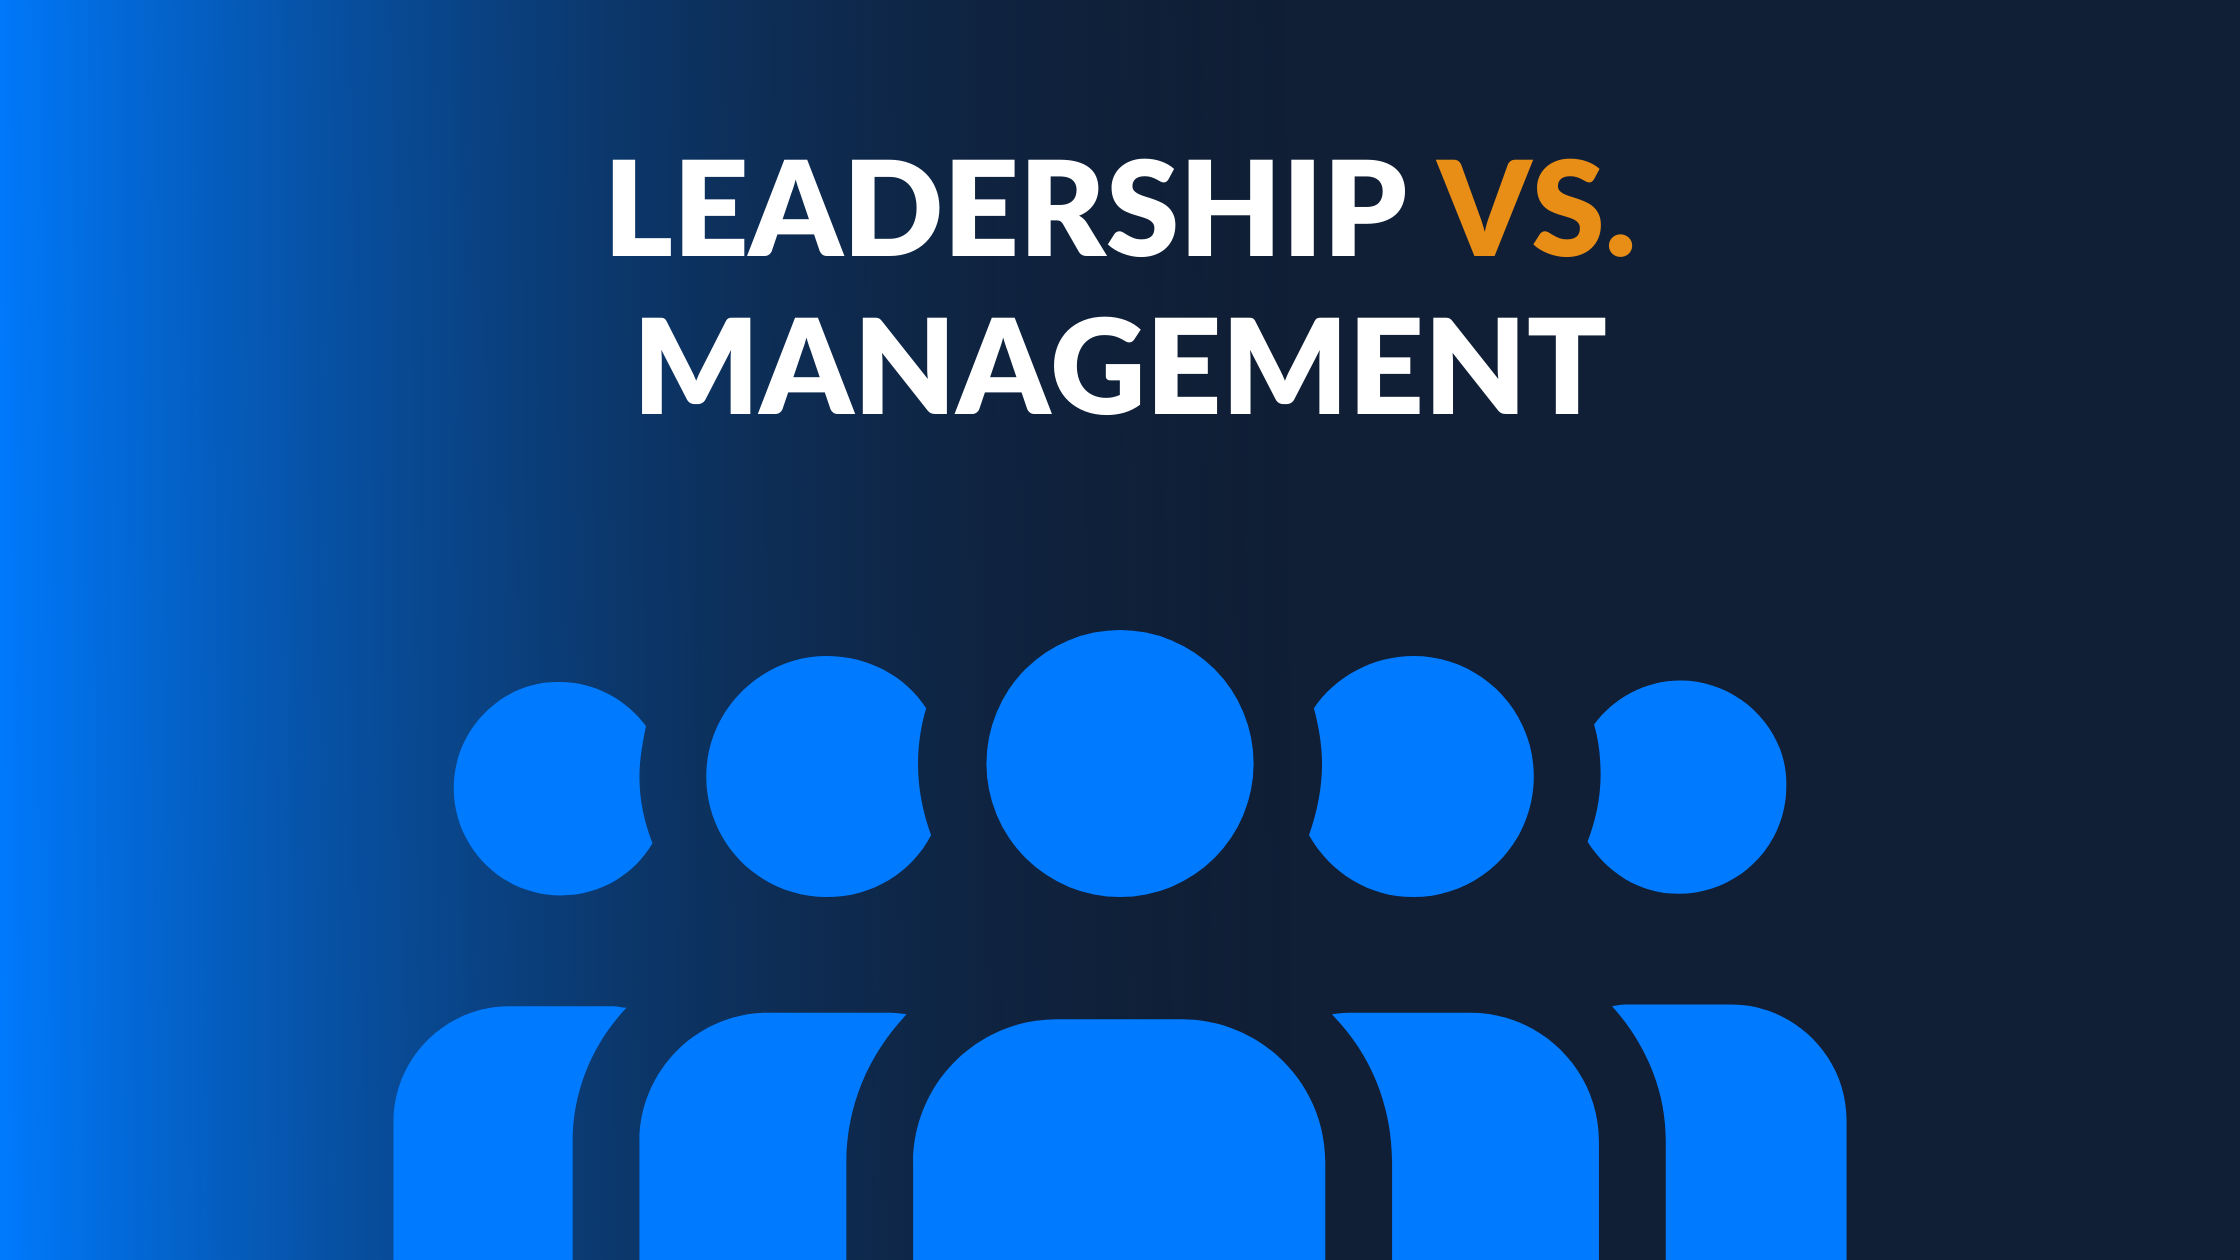 The Differences Between Leadership and Management